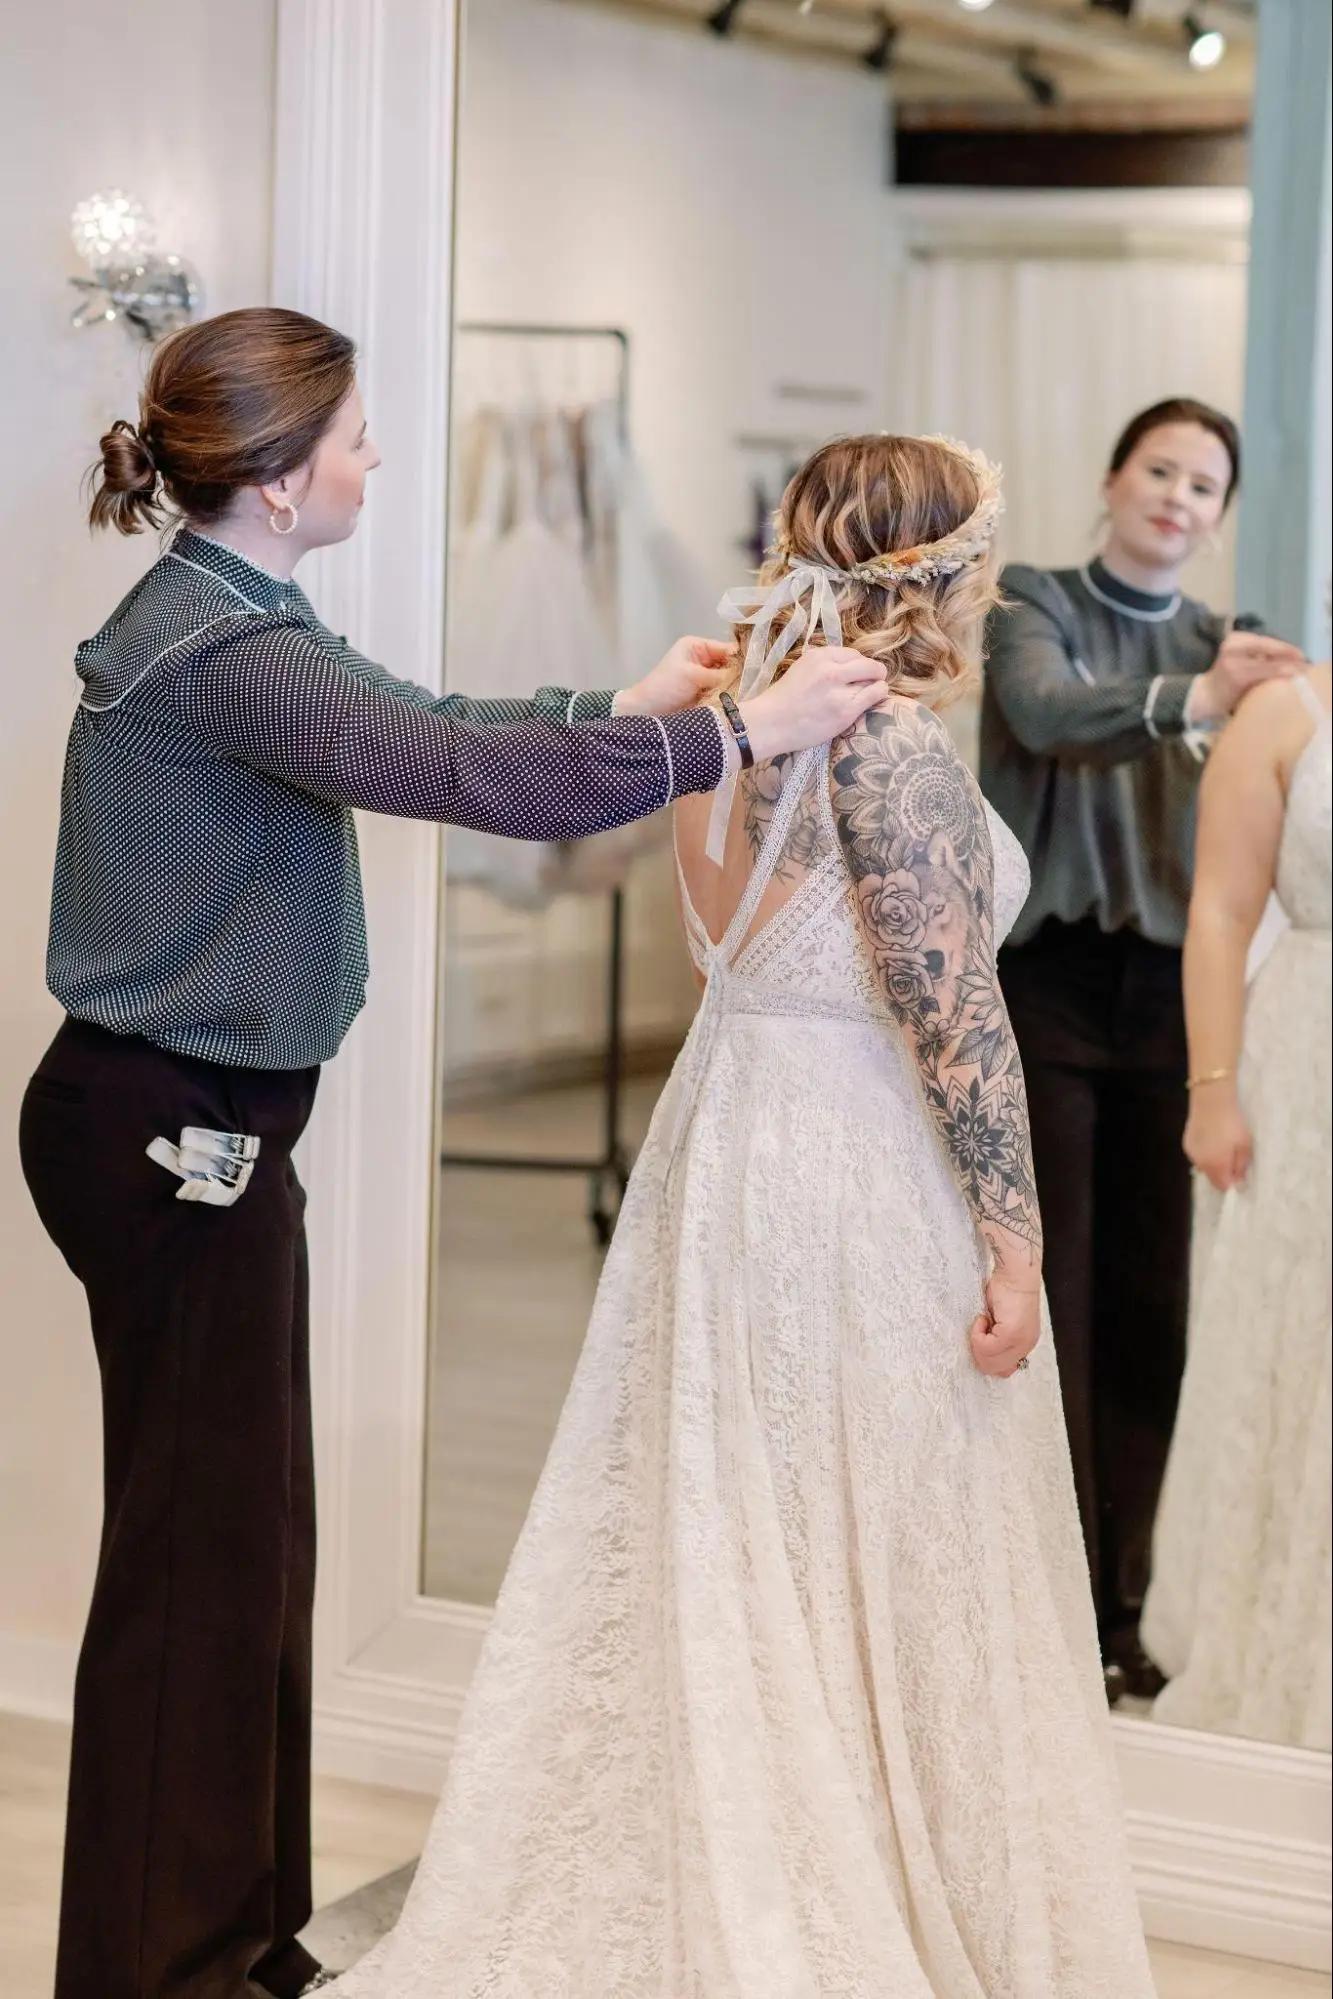 Belle Amour bridal stylist assisting bride during her appointment